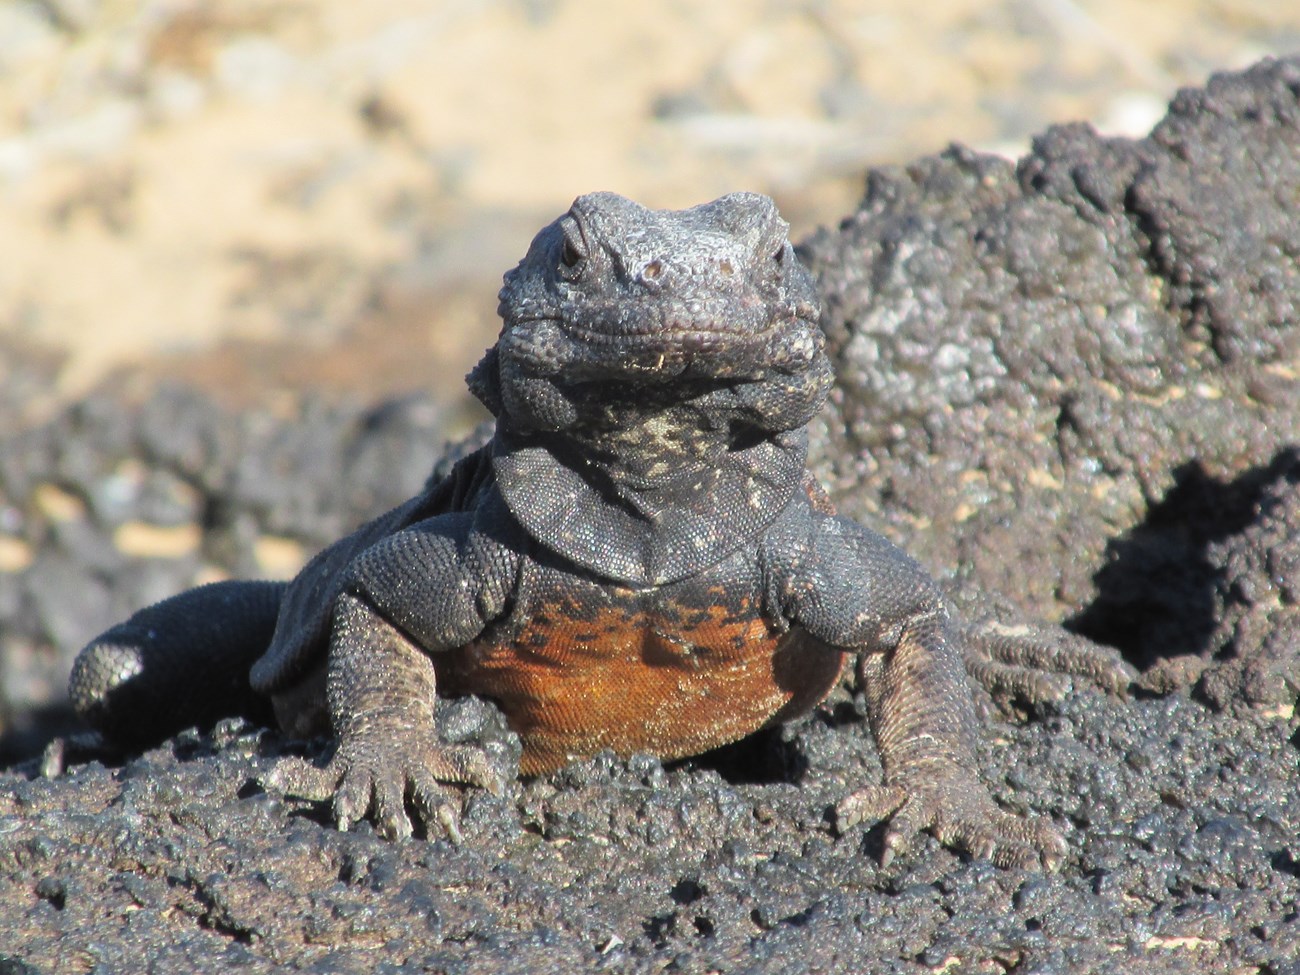 A chuckwalla looks at the camera. The lizard is mostly black with an orange chest.